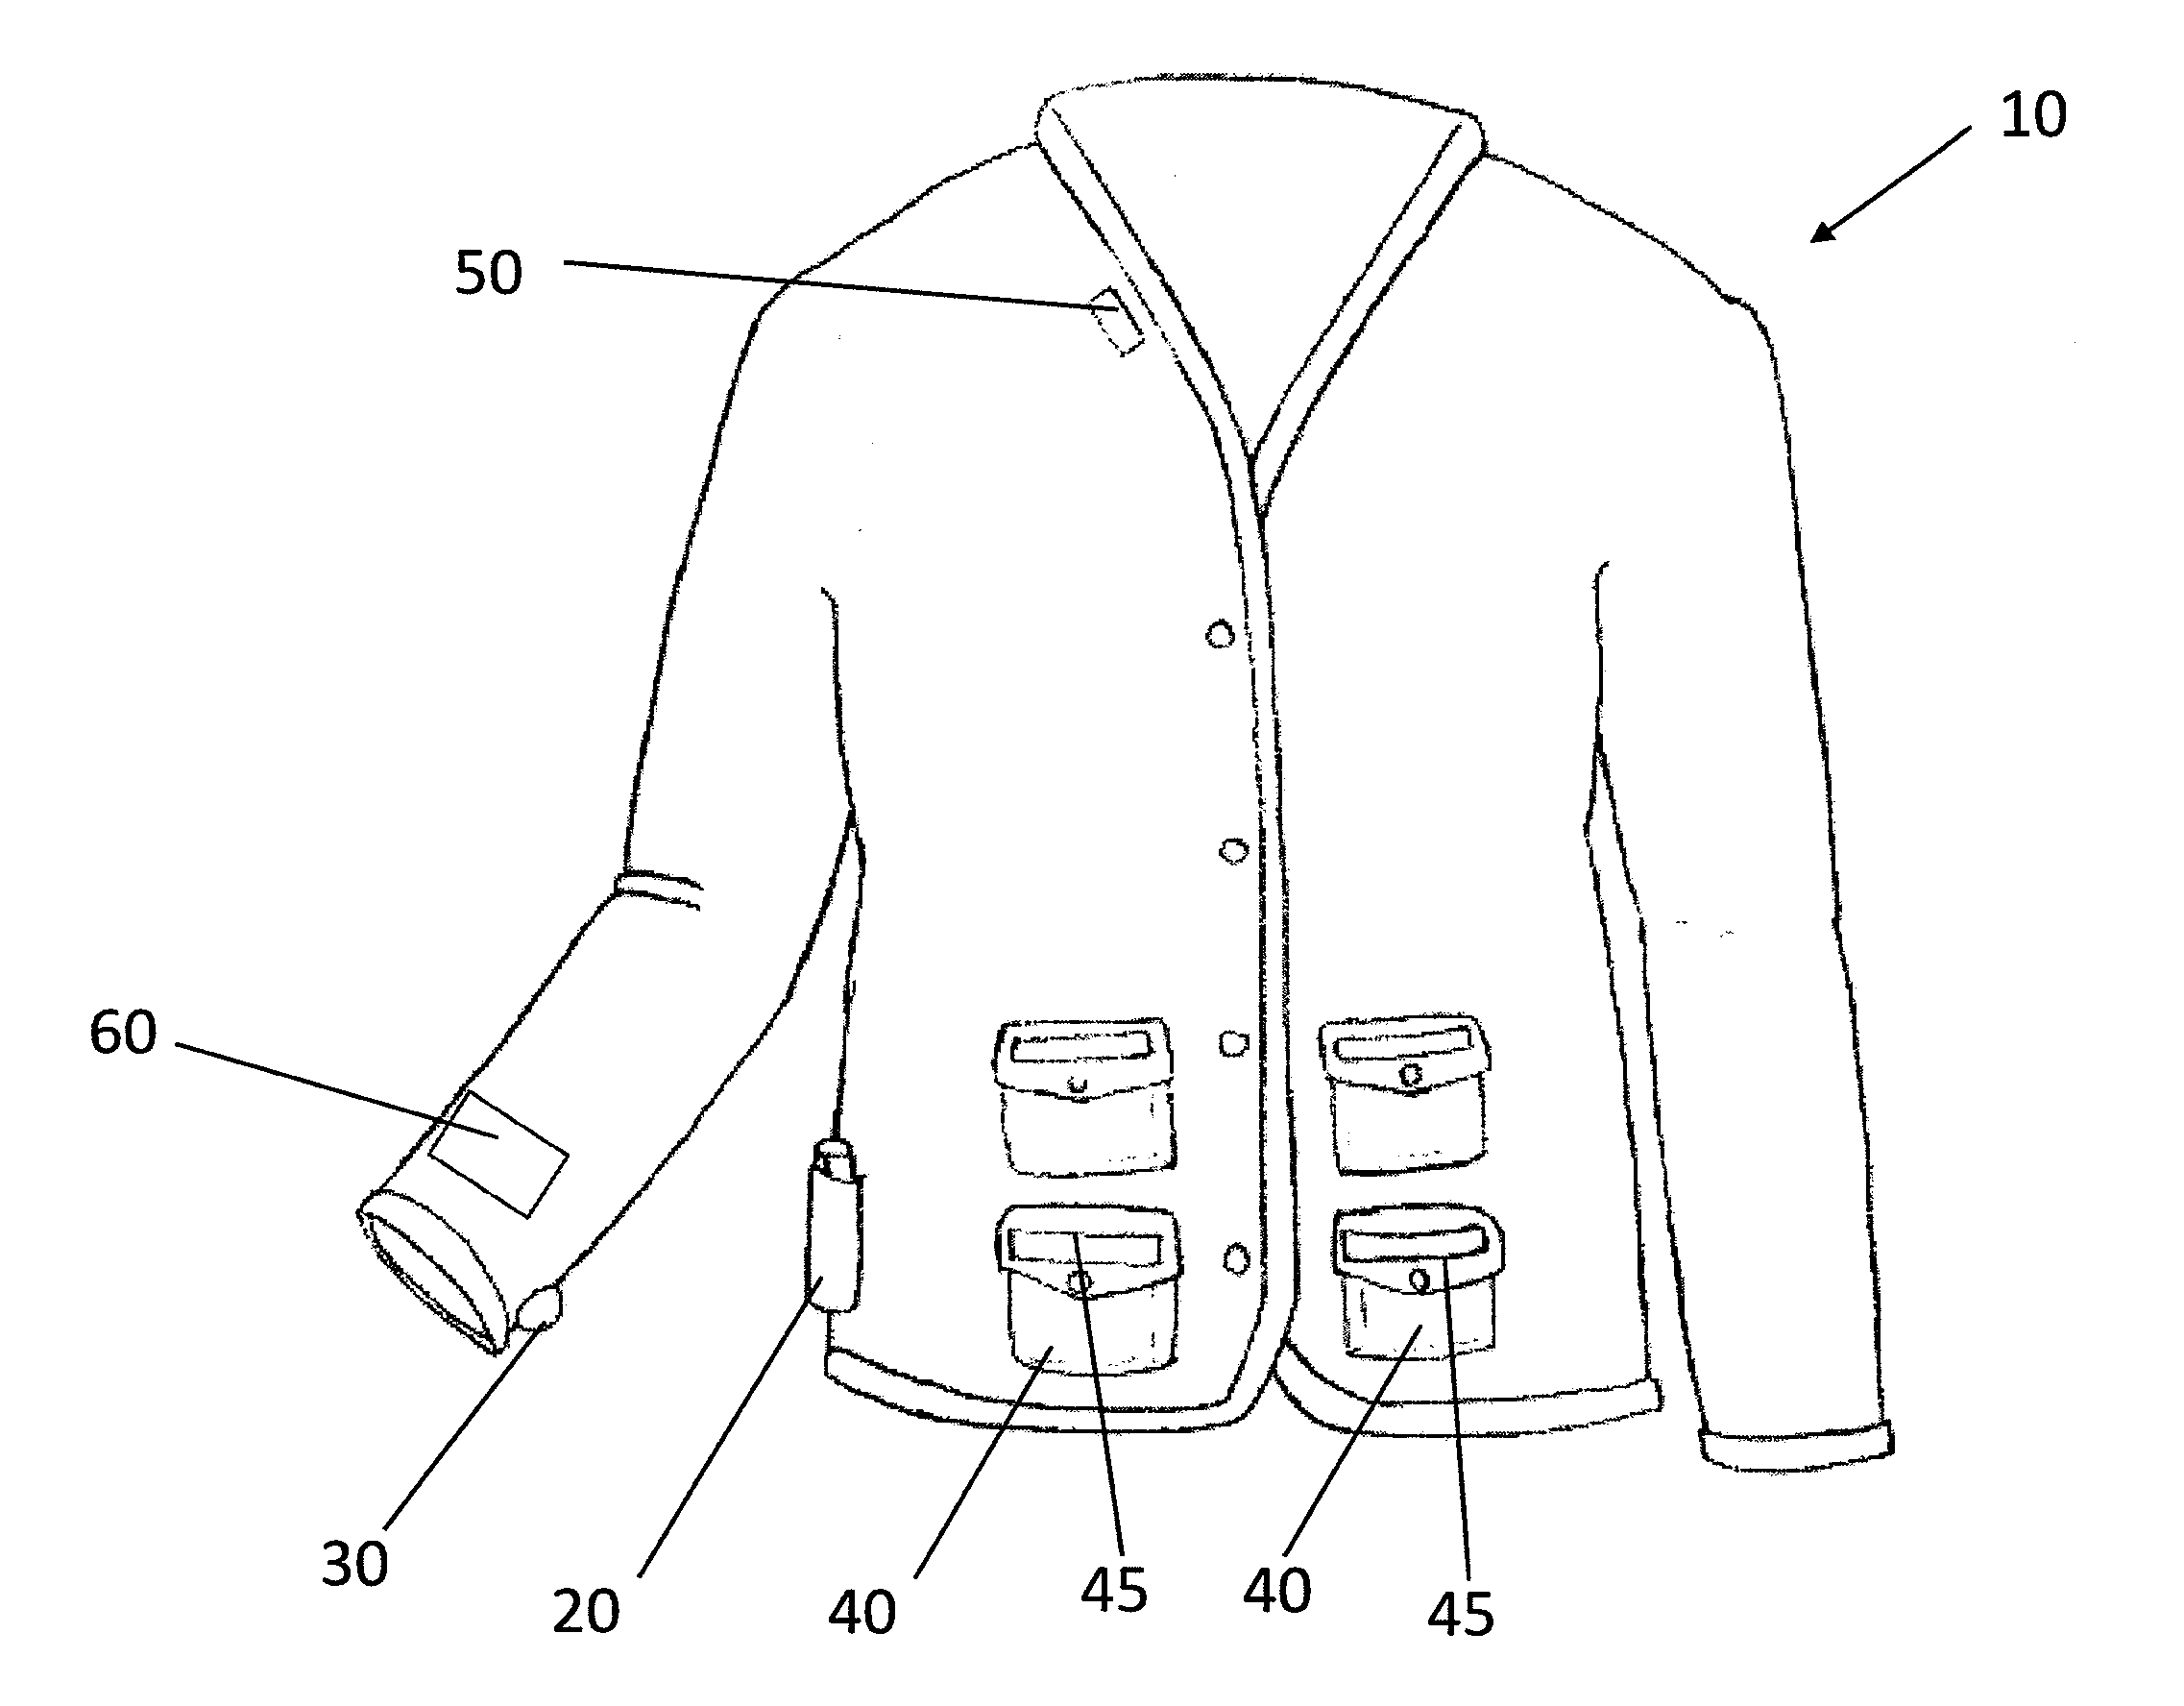 Patient point-of-care garment